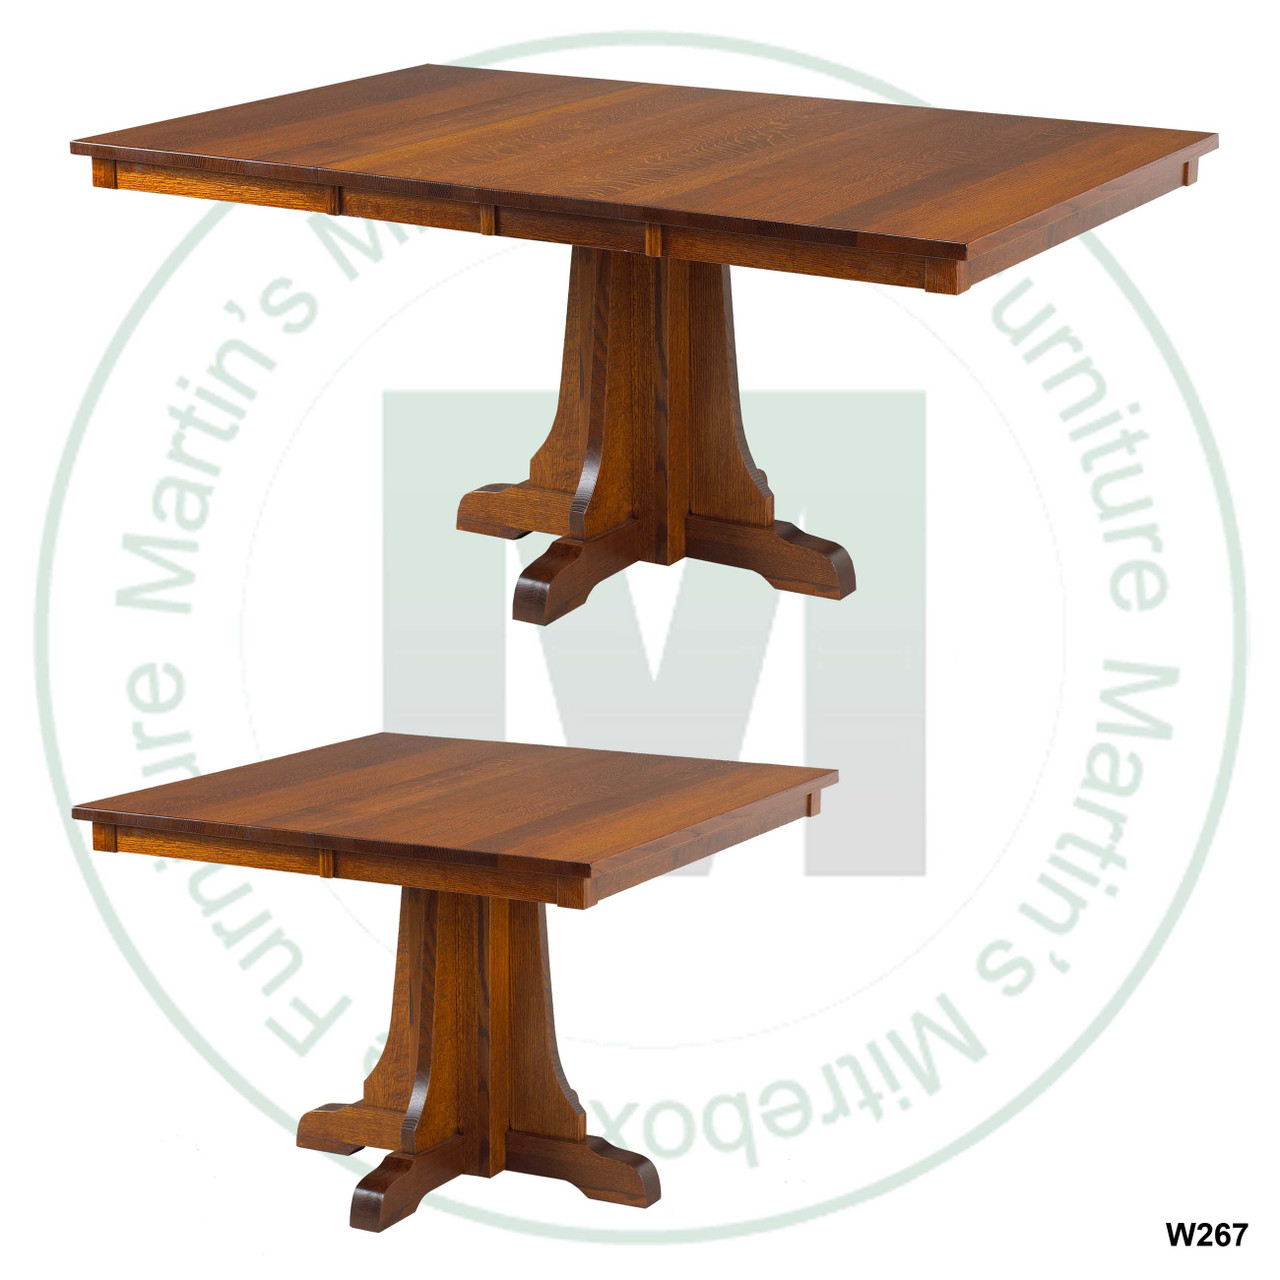 Oak Eastwood Single Pedestal Table 48''D x 48''W x 30''H With 2 - 12'' Leaves